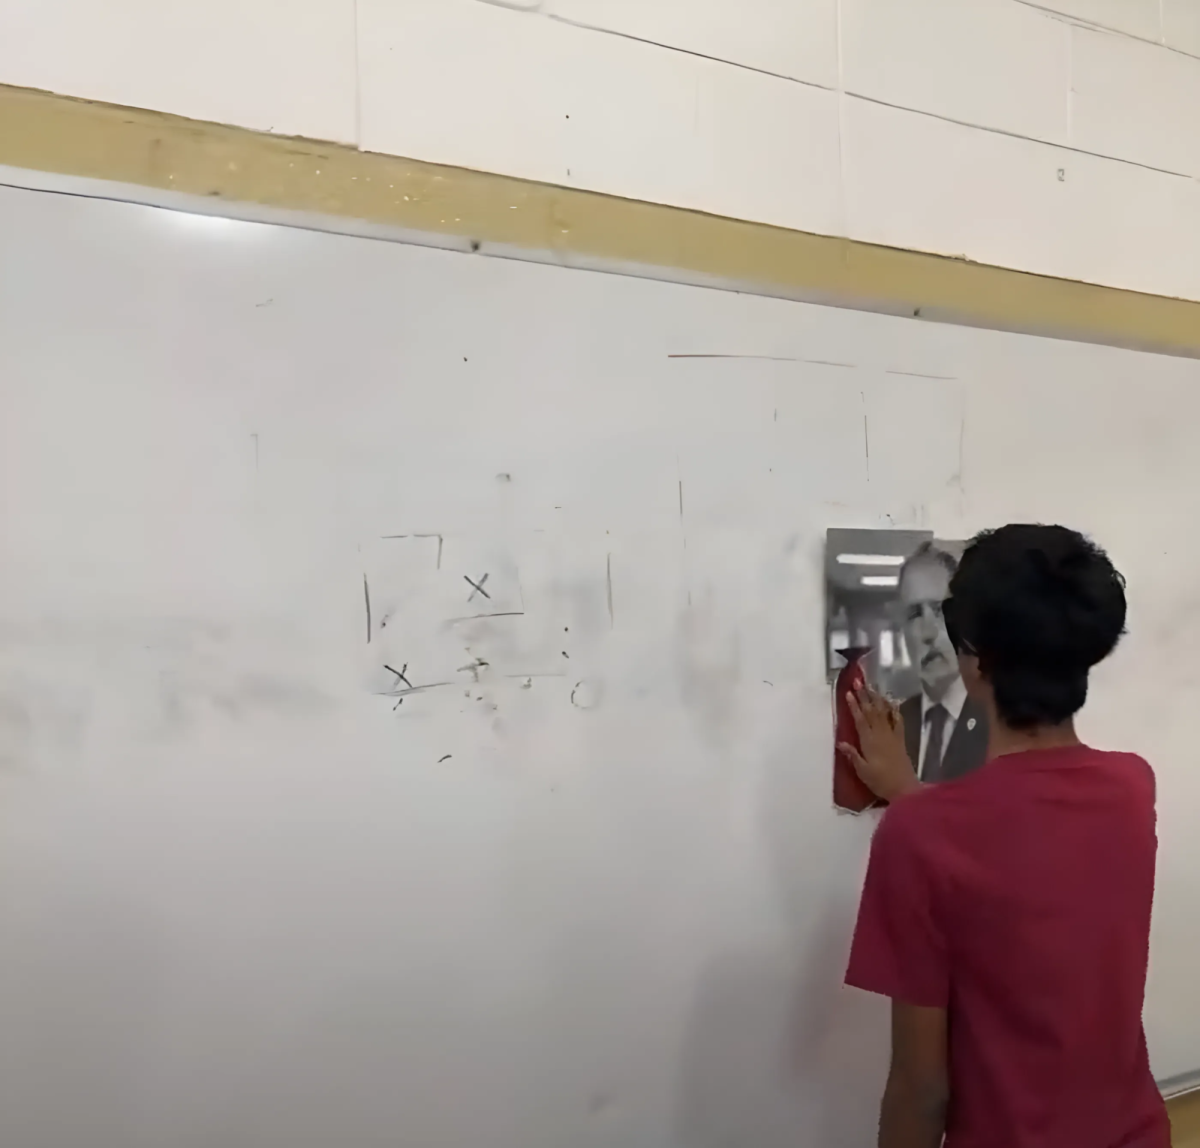 Navaneeth Krishna 27 participates in the Pin the Tie on Mr. Ross game, struggling to place the tie close to the target.